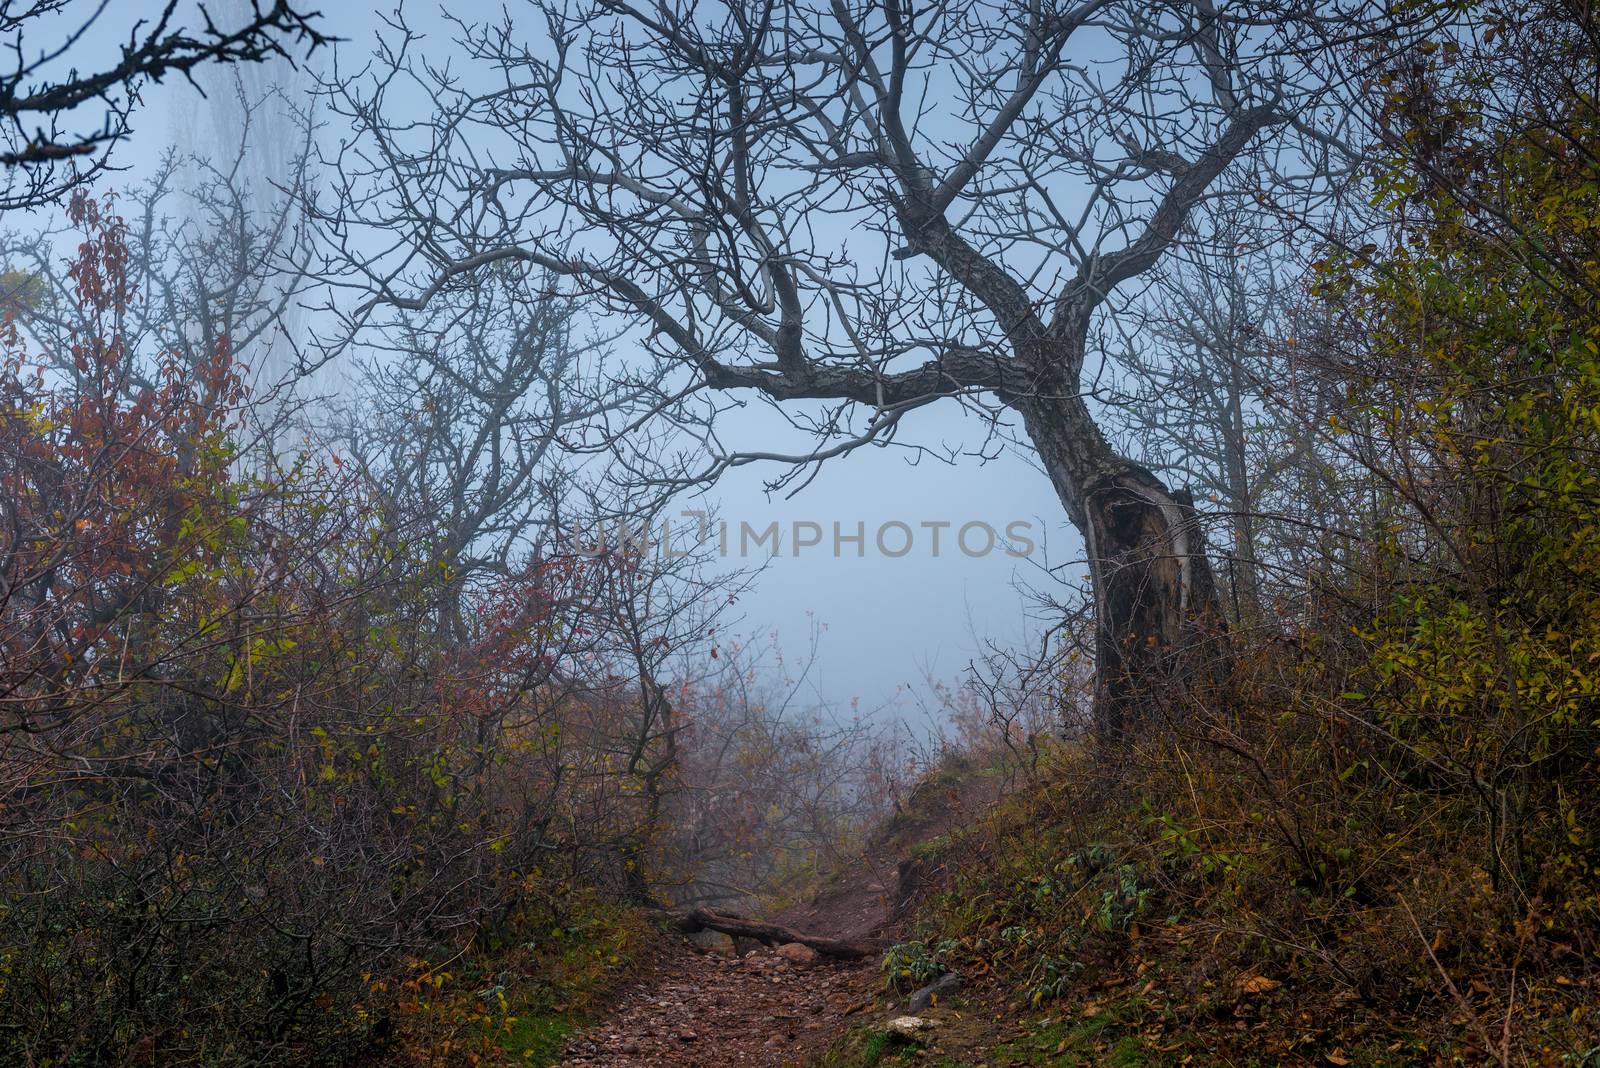 in the frame snag with fallen leaves foggy autumn day, landscape in the mountains